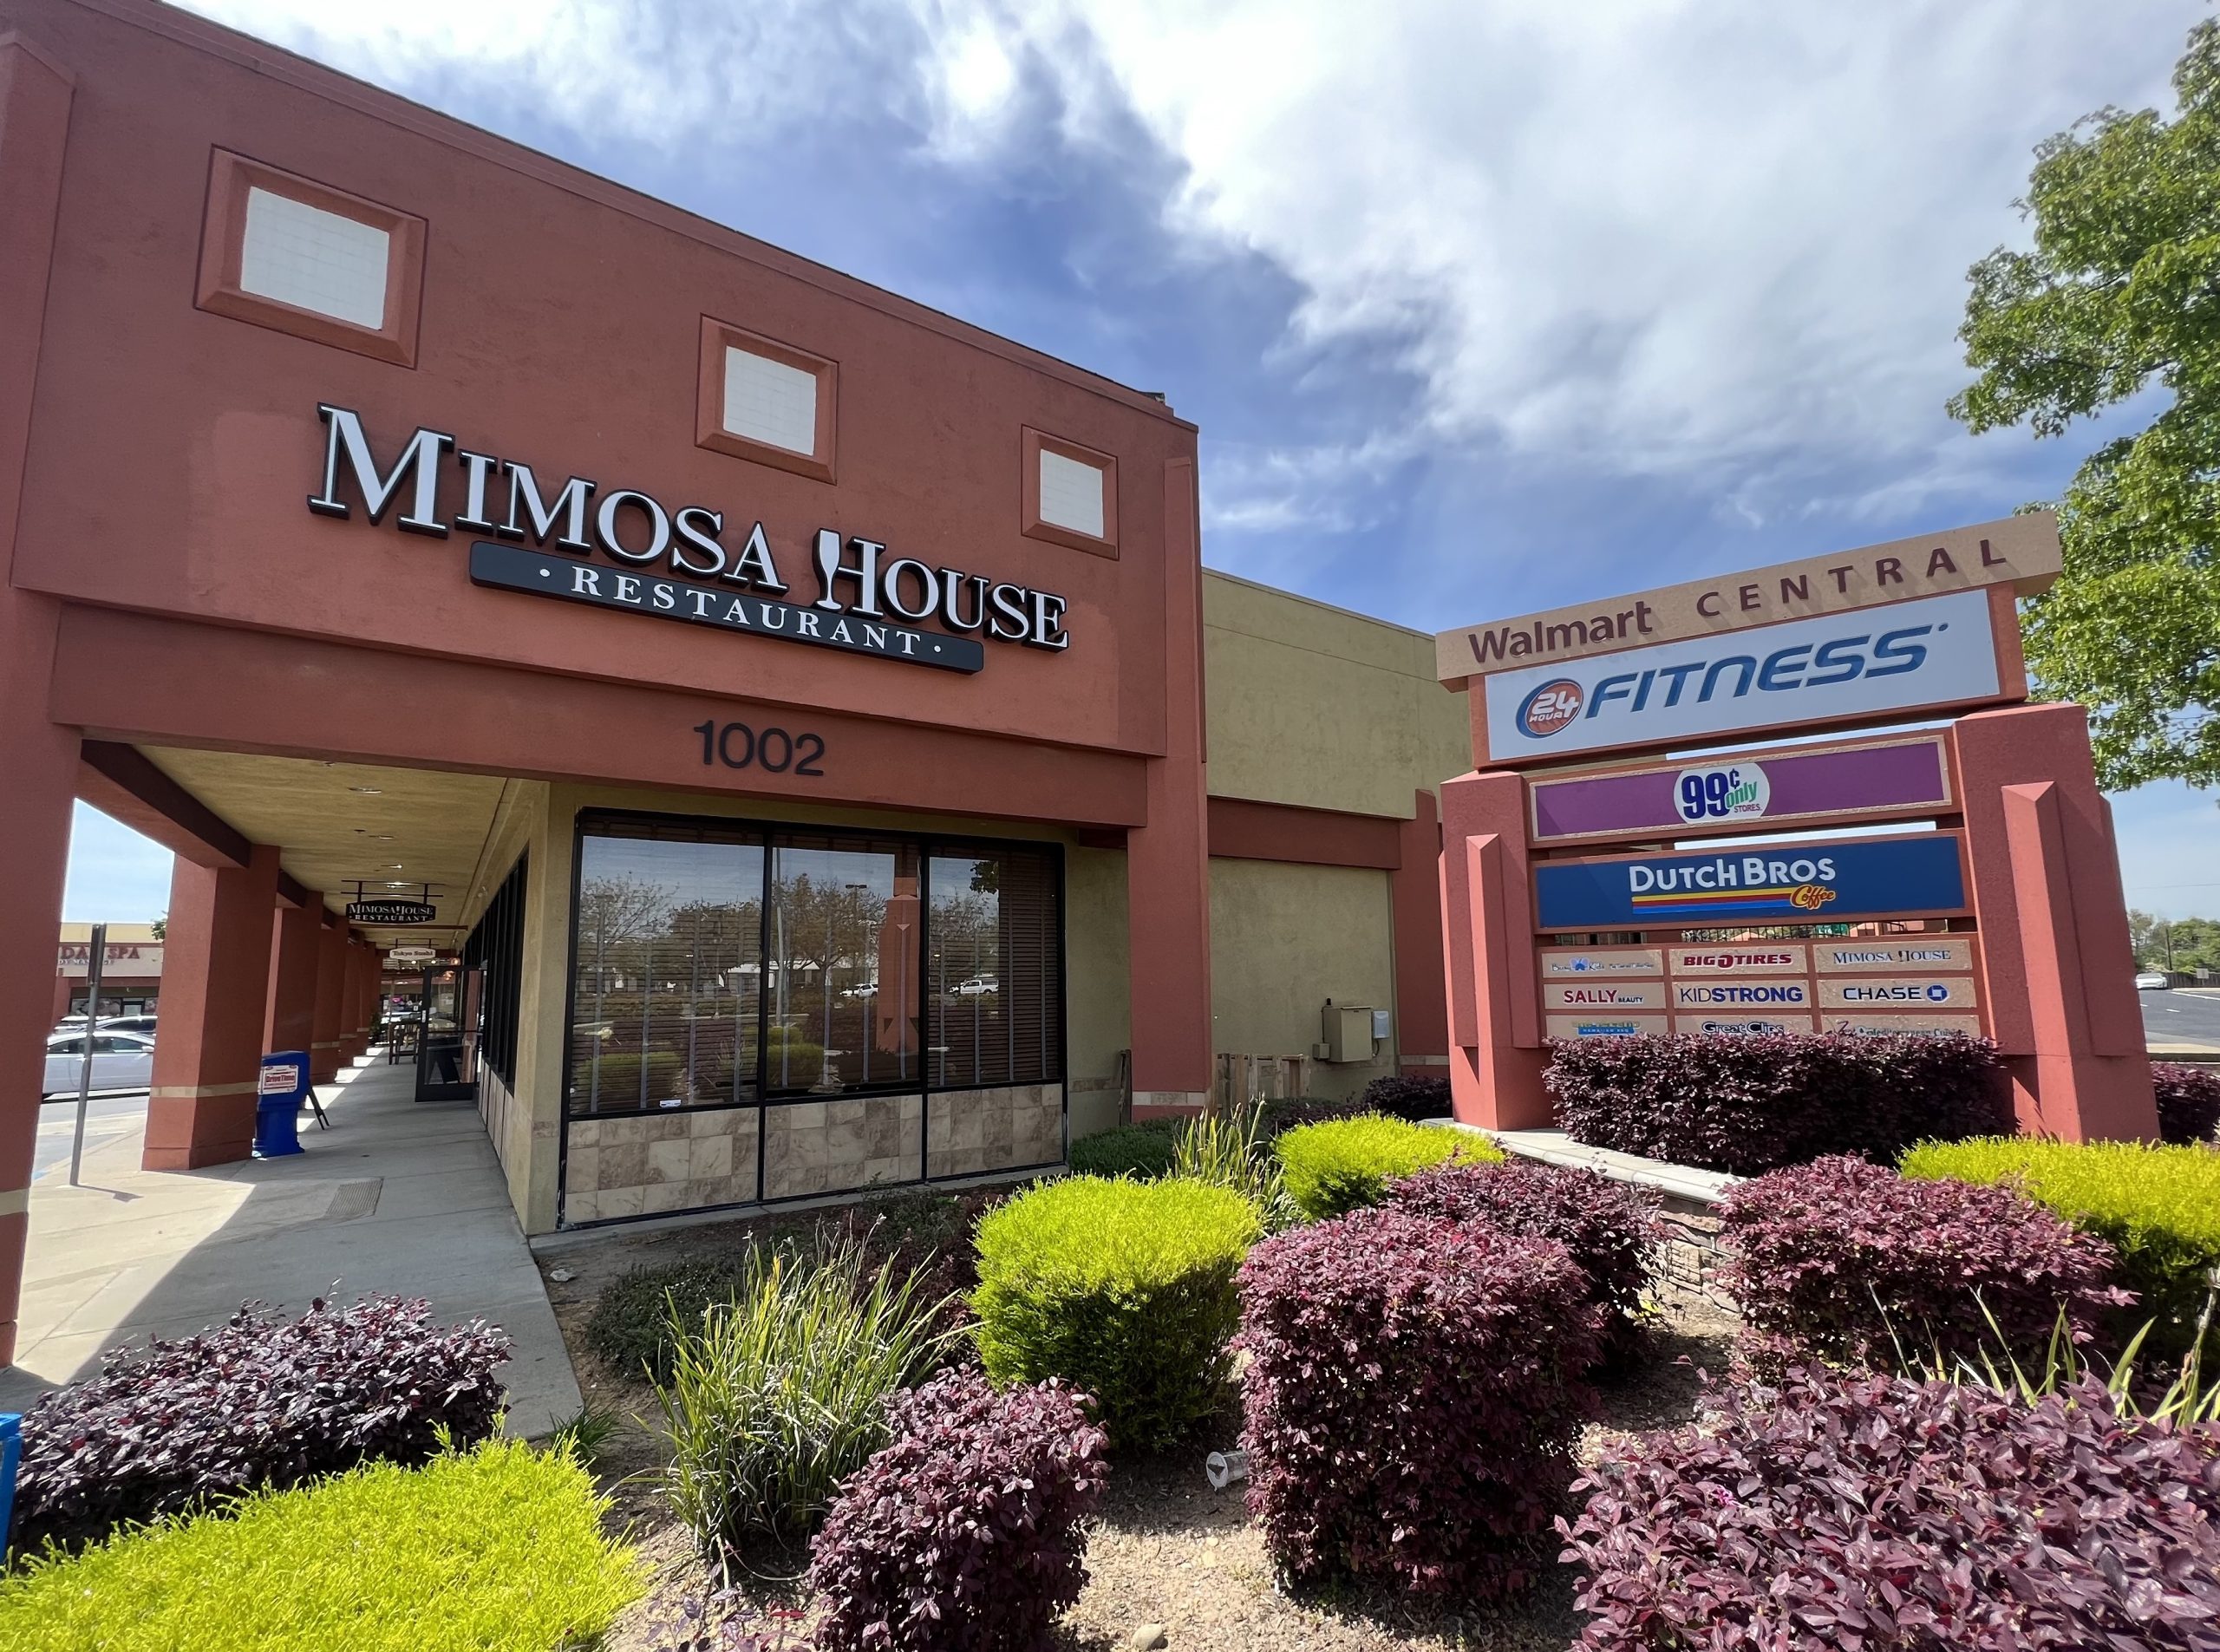 Second Mimosa House spot brings more bubbly to Folsom